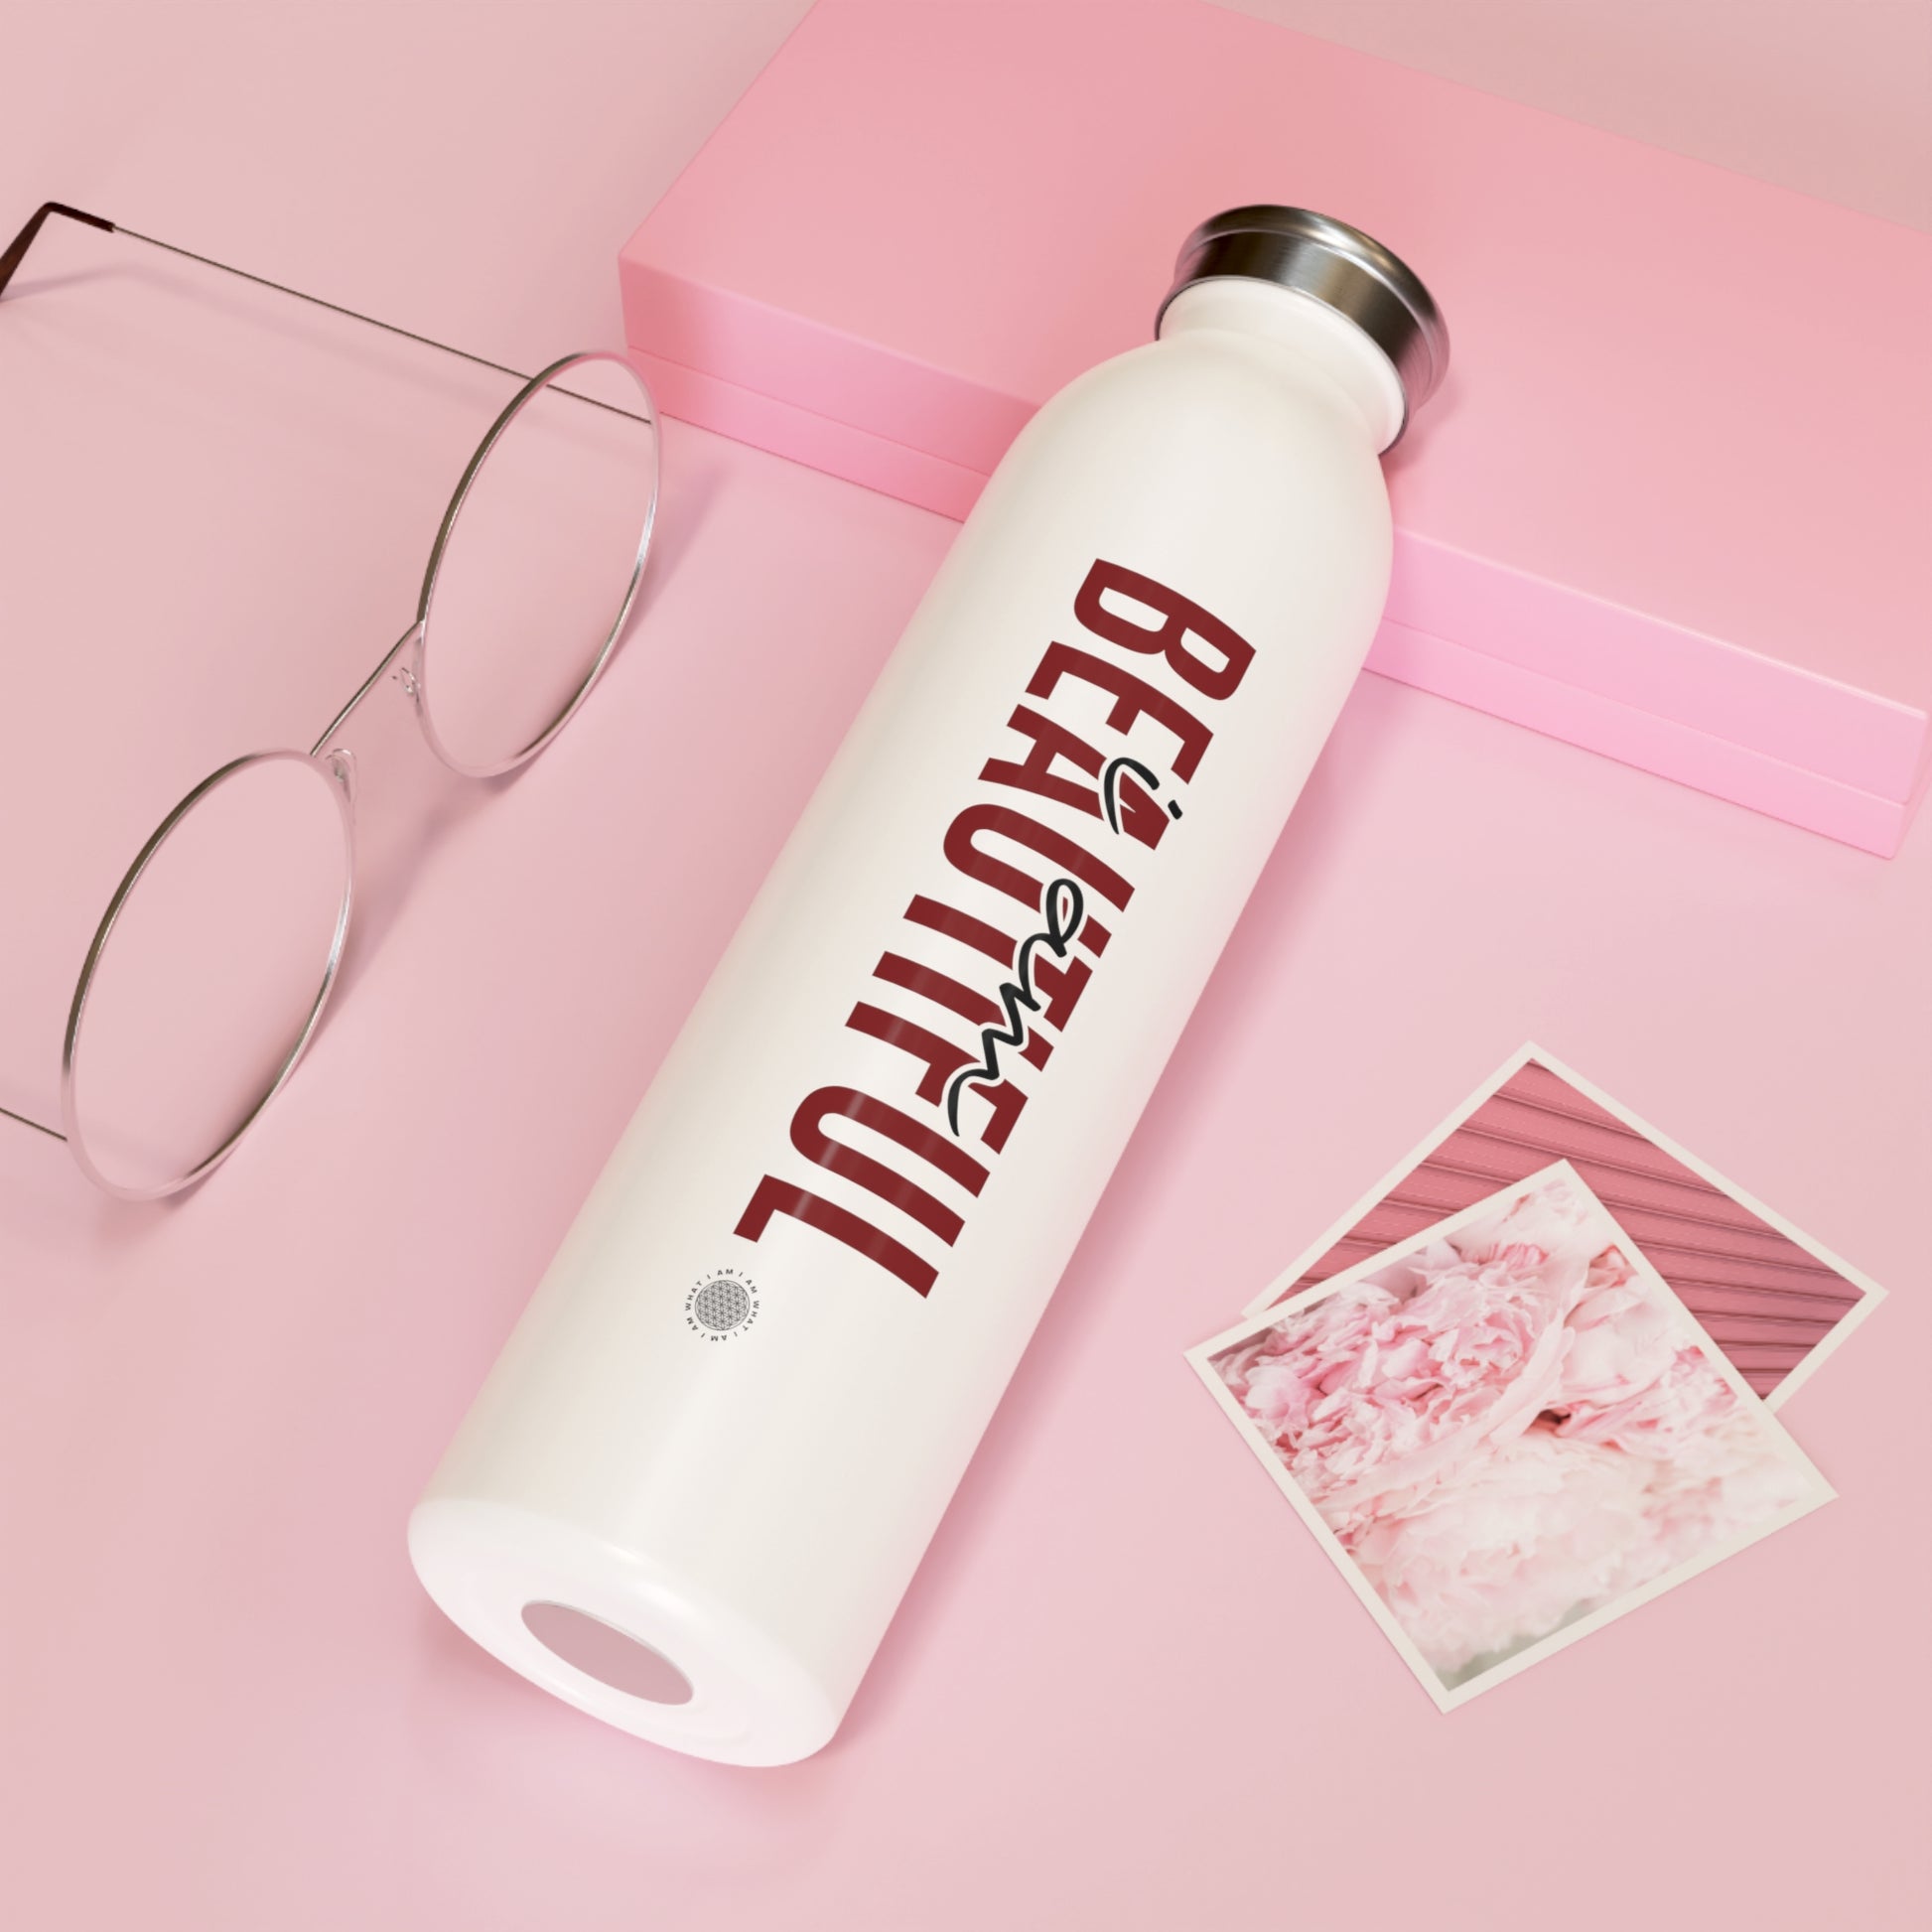 Our I Am Beautiful affirmation water bottle is one of our positive affirmations for mental health. Positive thinking keeps our mindset happy and healthy. This personalized water bottle was designed to become your favorite canvas of expression.